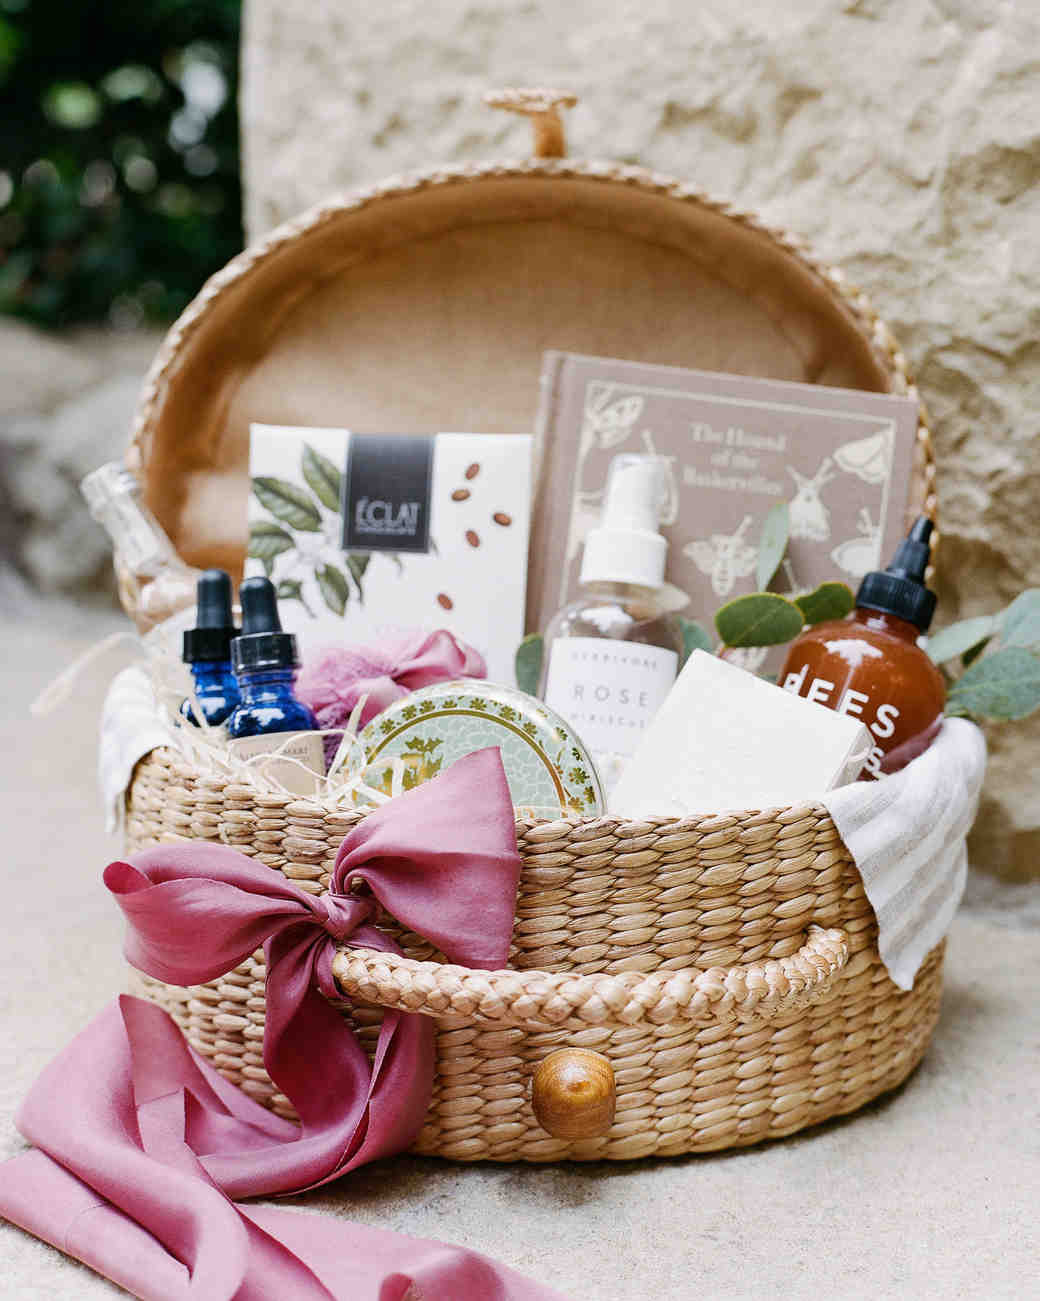 Wedding Gift Ideas For Outdoorsy Couple
 Wedding Gift Ideas for the Couple Who Likes To Entertain